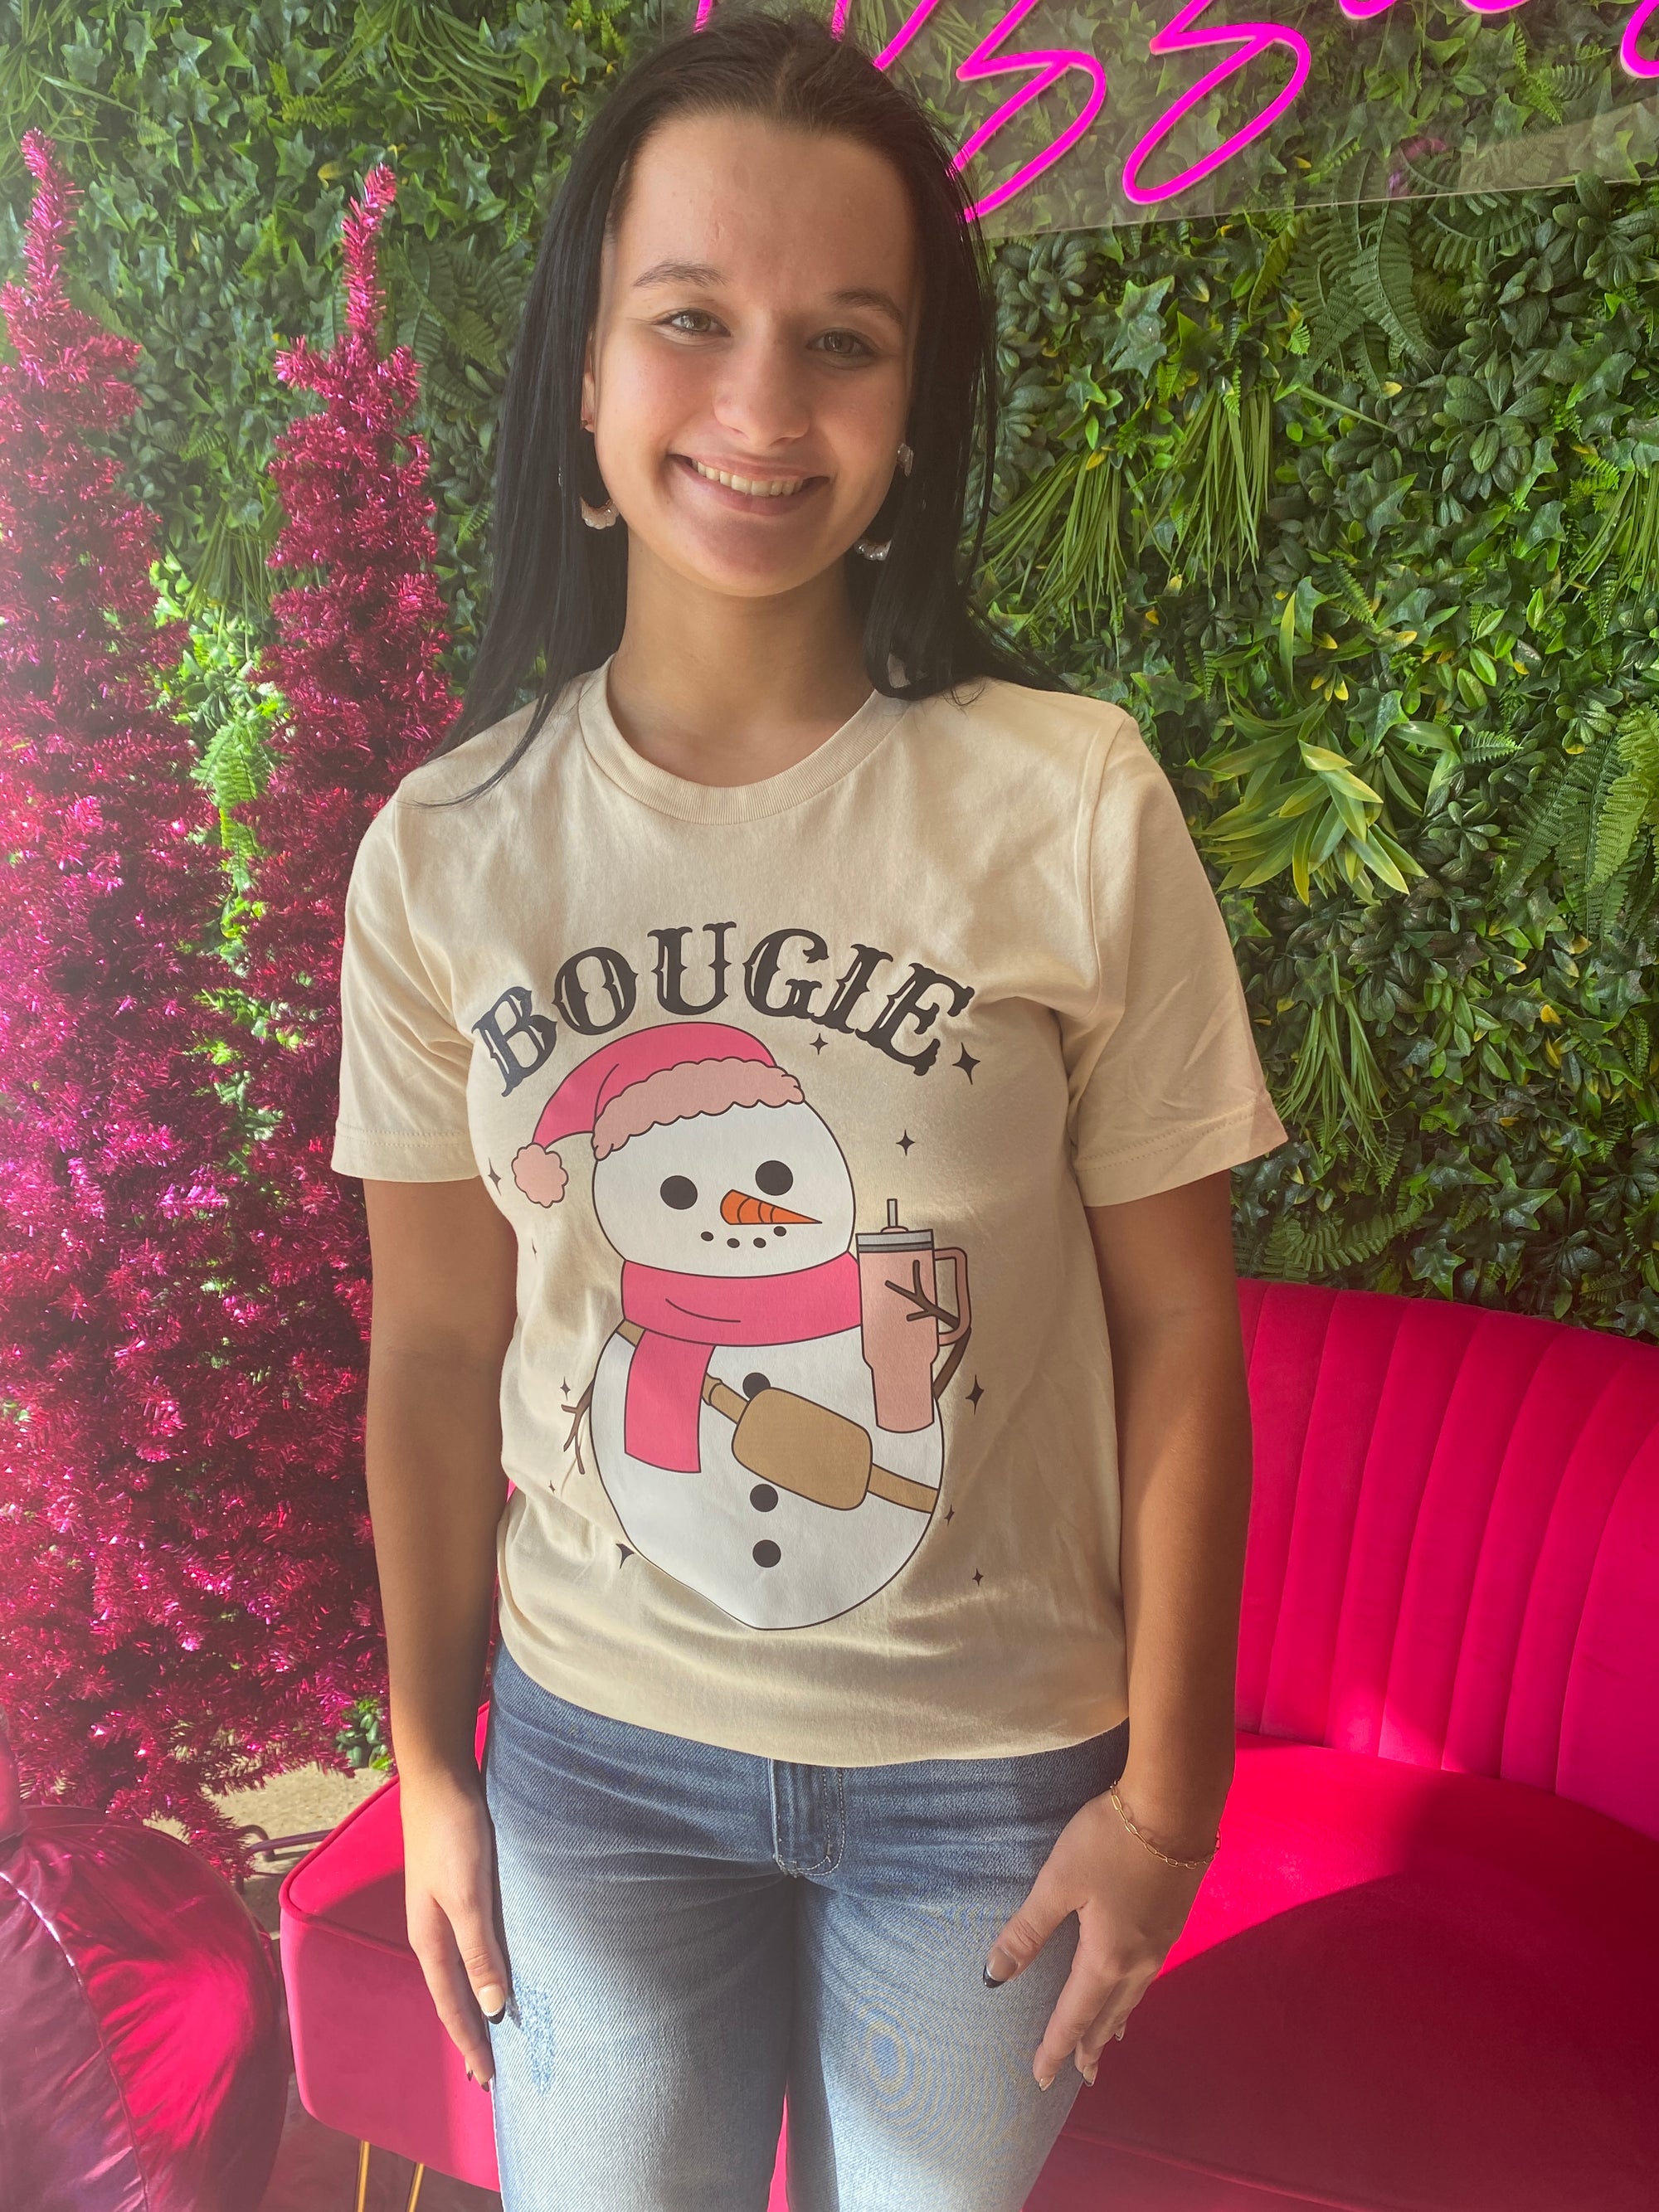 Bougie - Bougie Snowman Graphic Tee